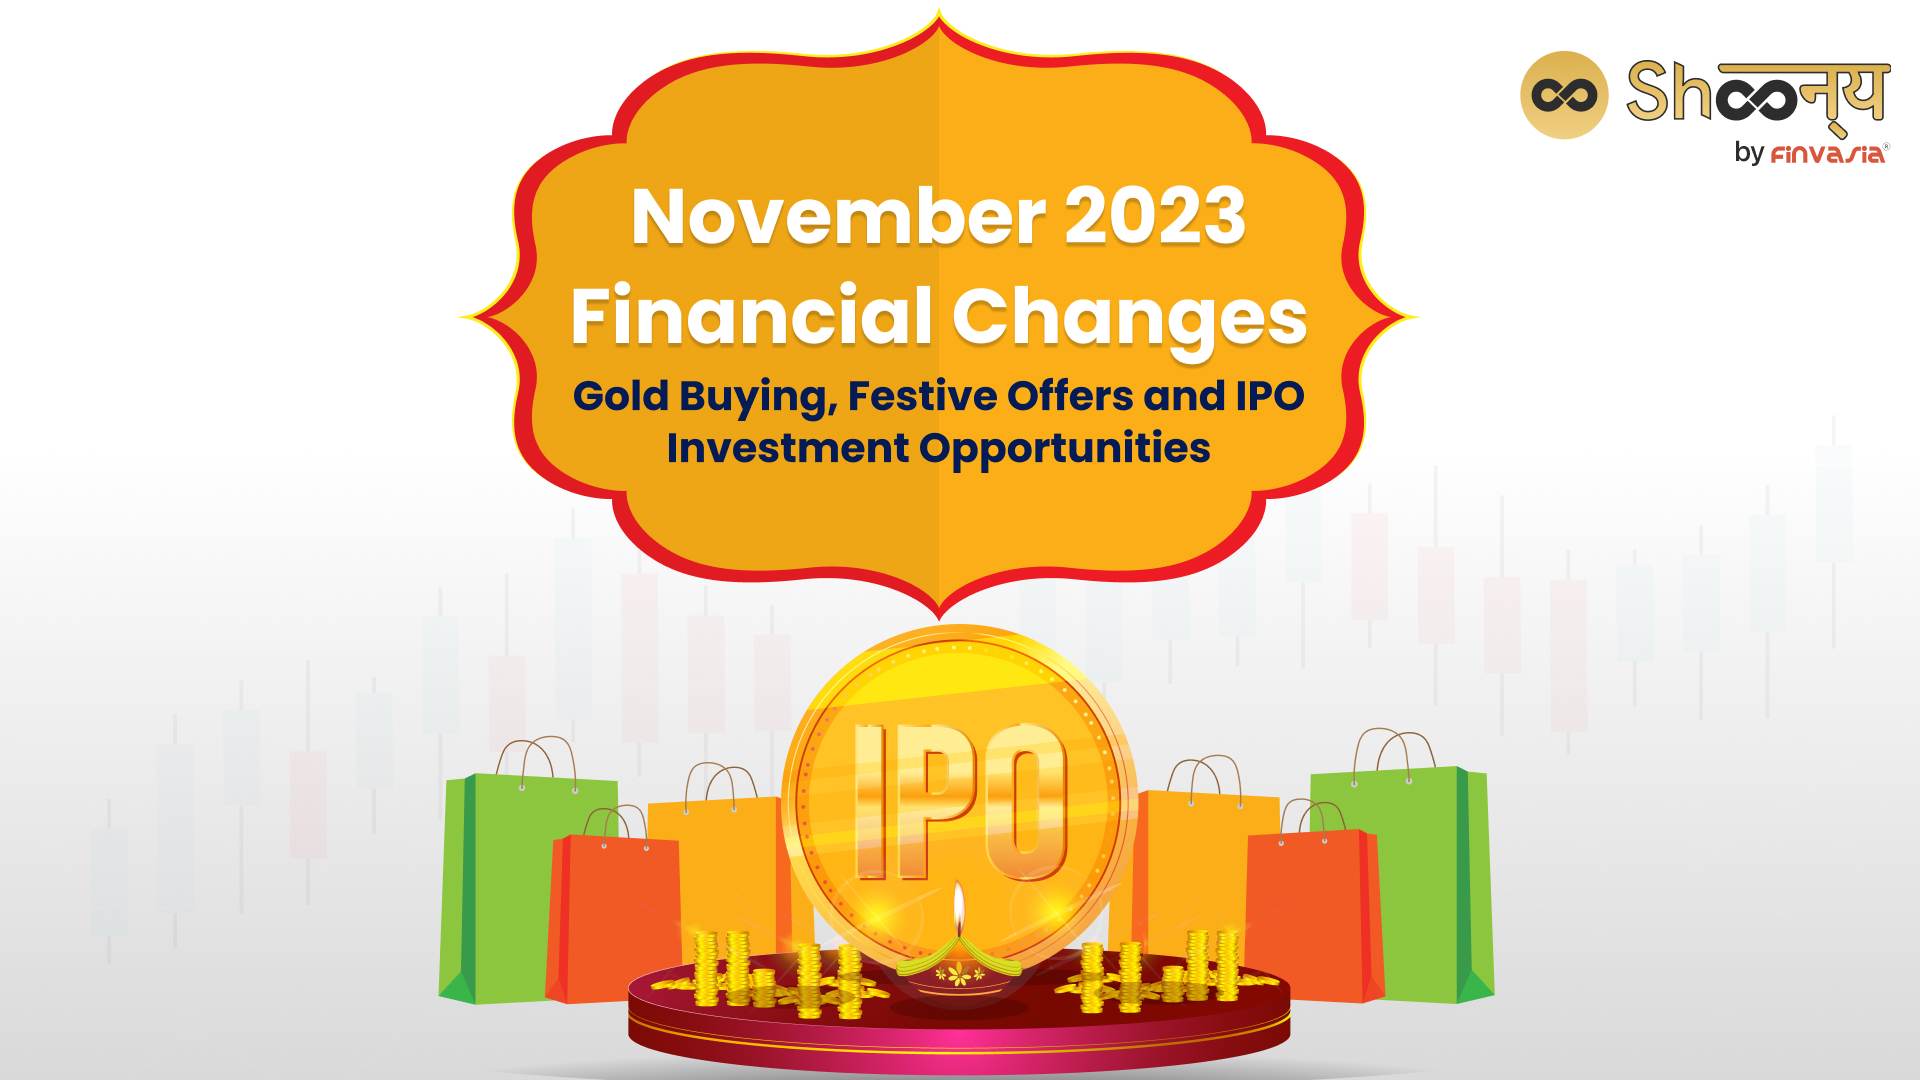 Explore the Major Financial Changes in November 2023